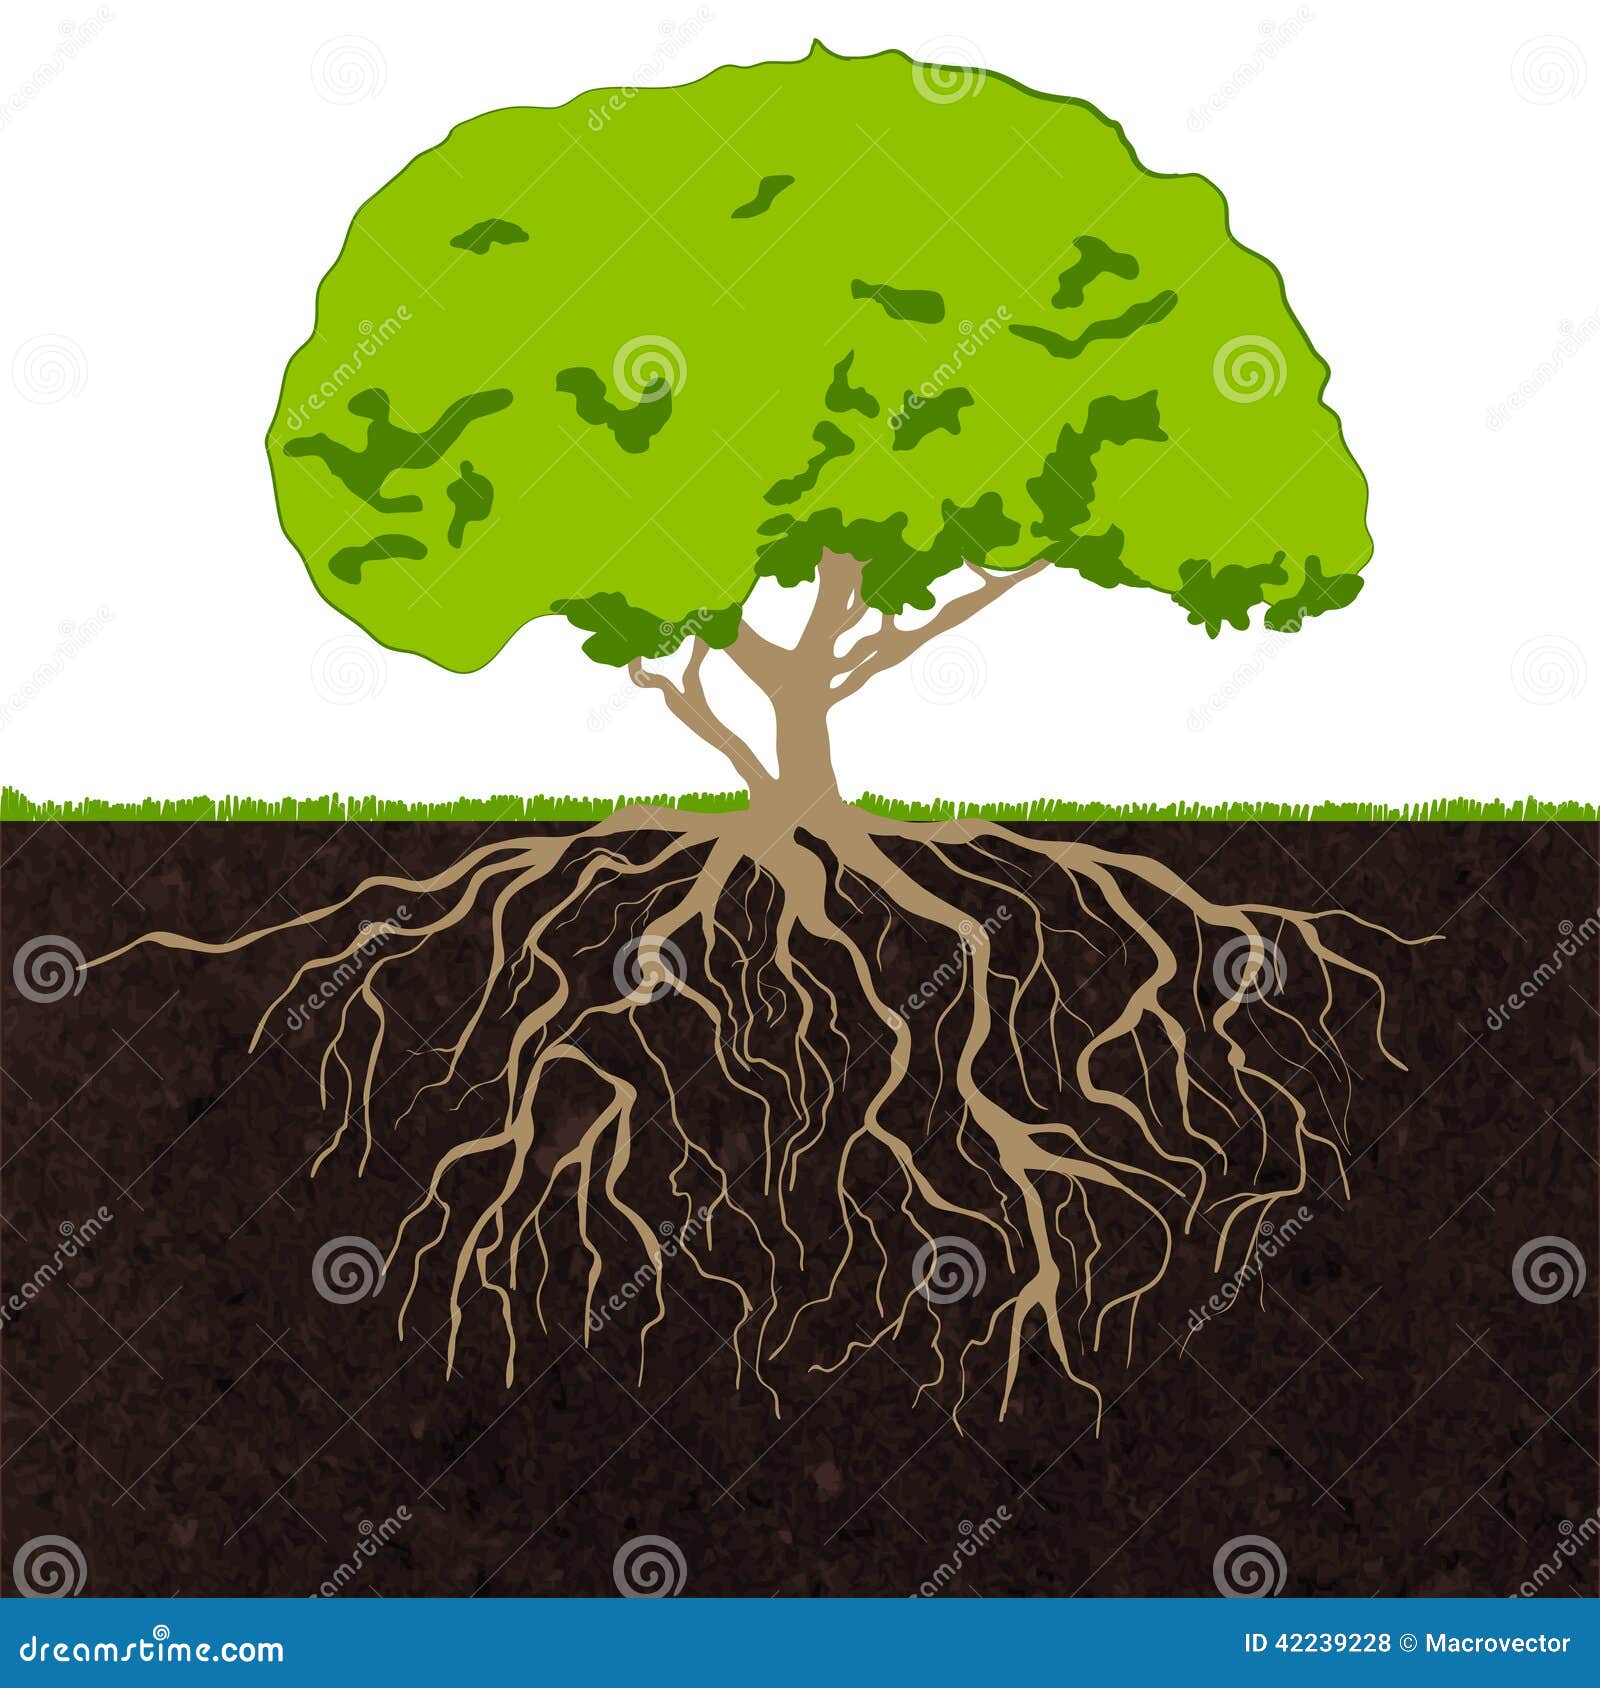 Searching for the Ideal Oak | Tree with roots drawing, Roots drawing, Tree  drawing